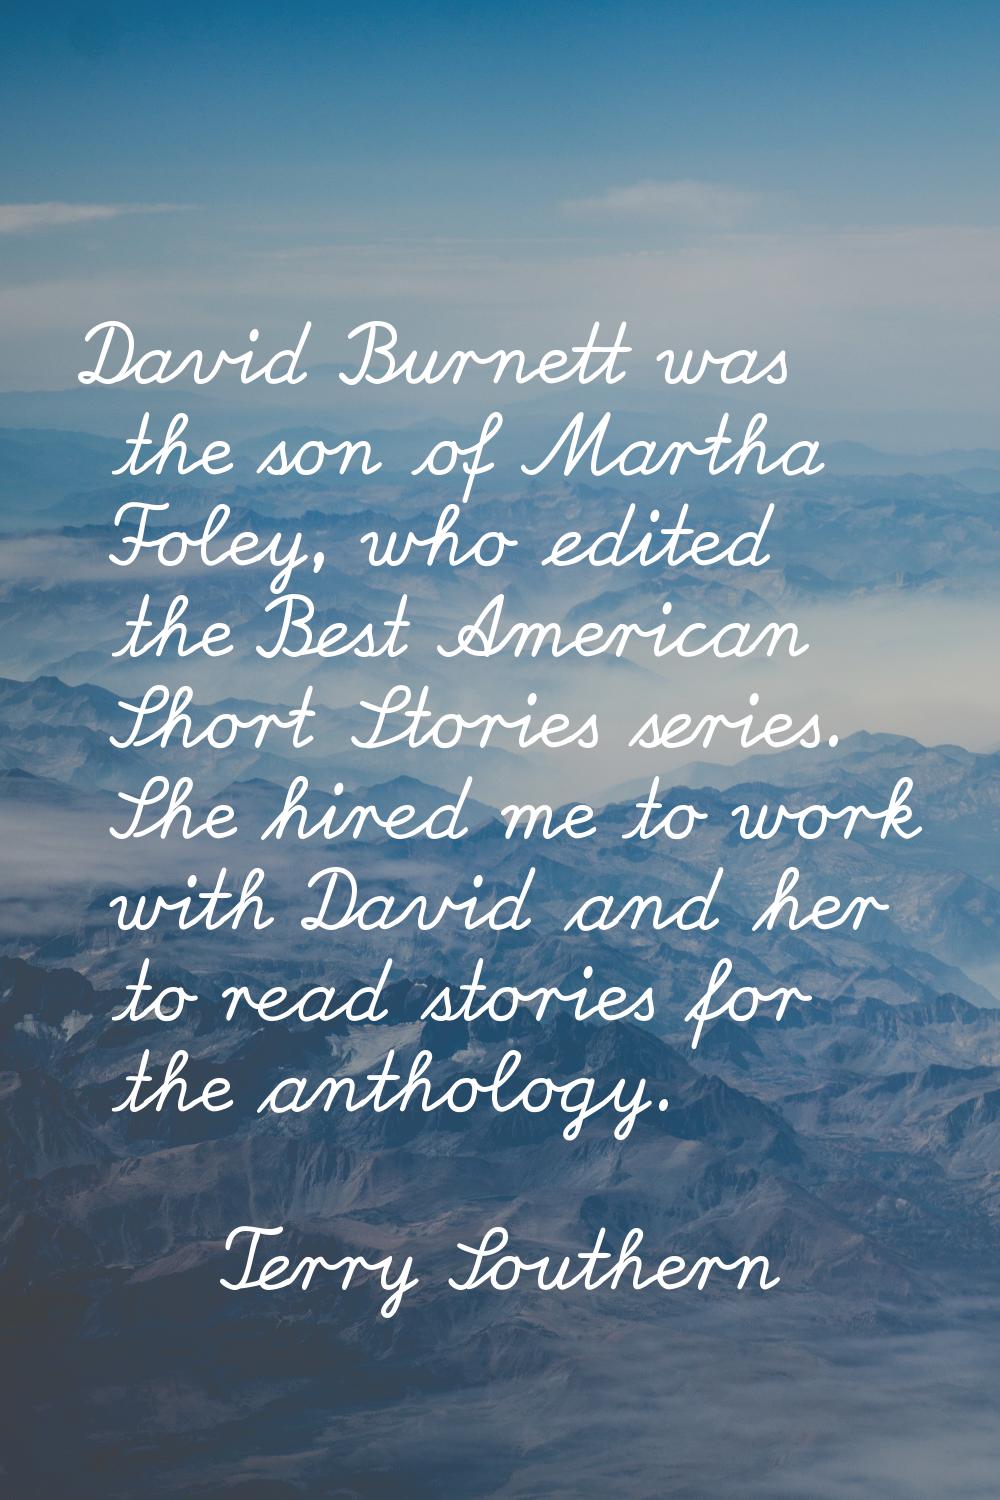 David Burnett was the son of Martha Foley, who edited the Best American Short Stories series. She h